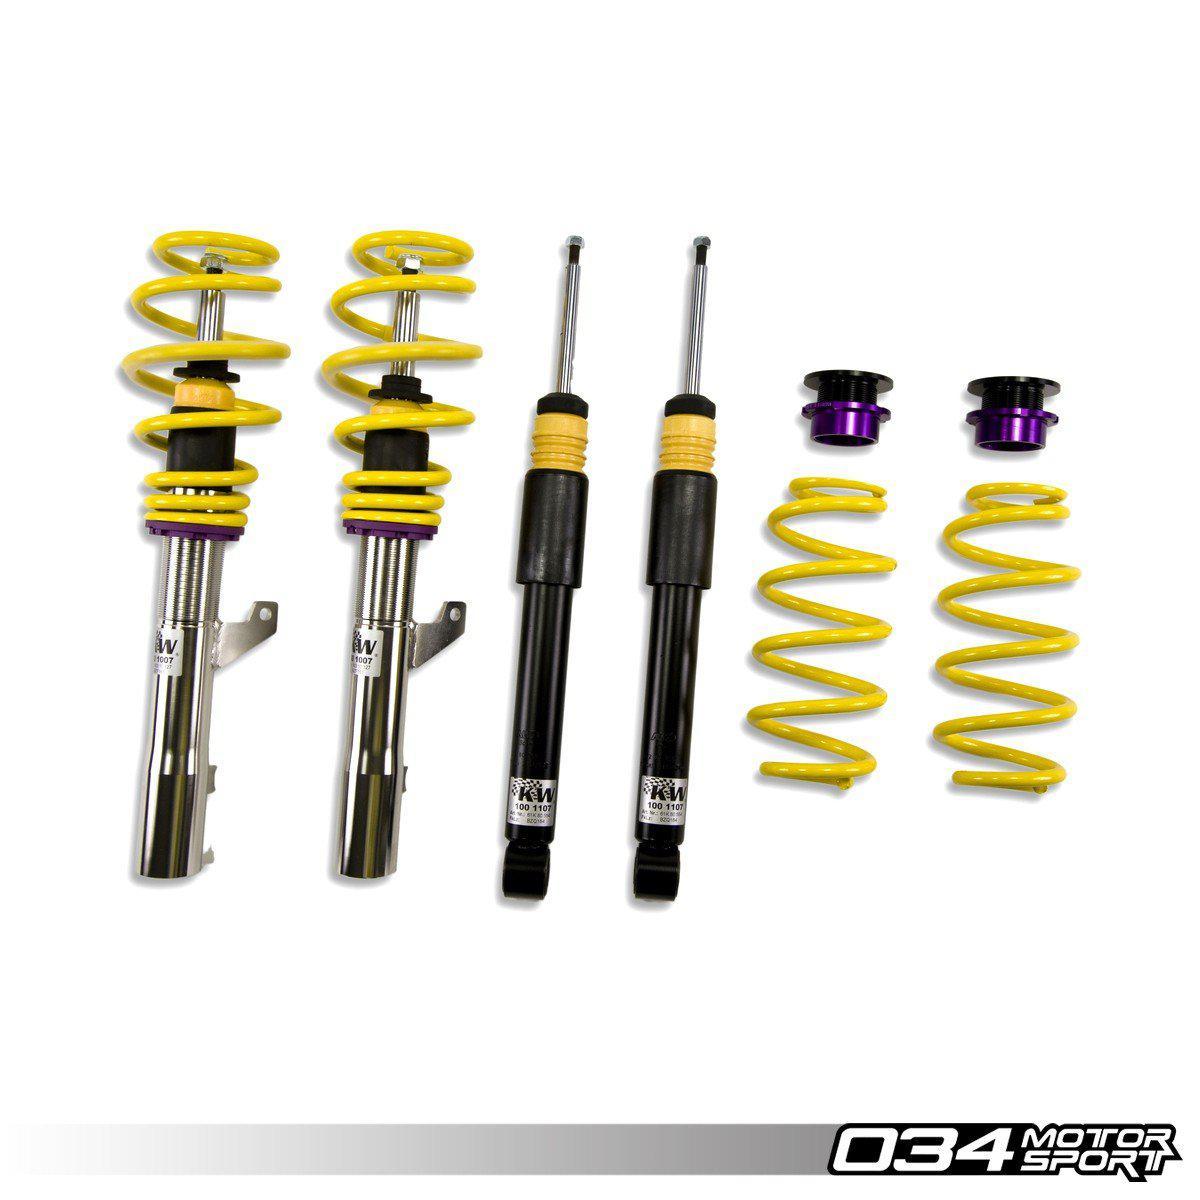 KW Variant 1 Coilover Suspension, B8 Audi A4/A5/S4/S5 FWD & Quattro With Electronic Dampening-A Little Tuning Co